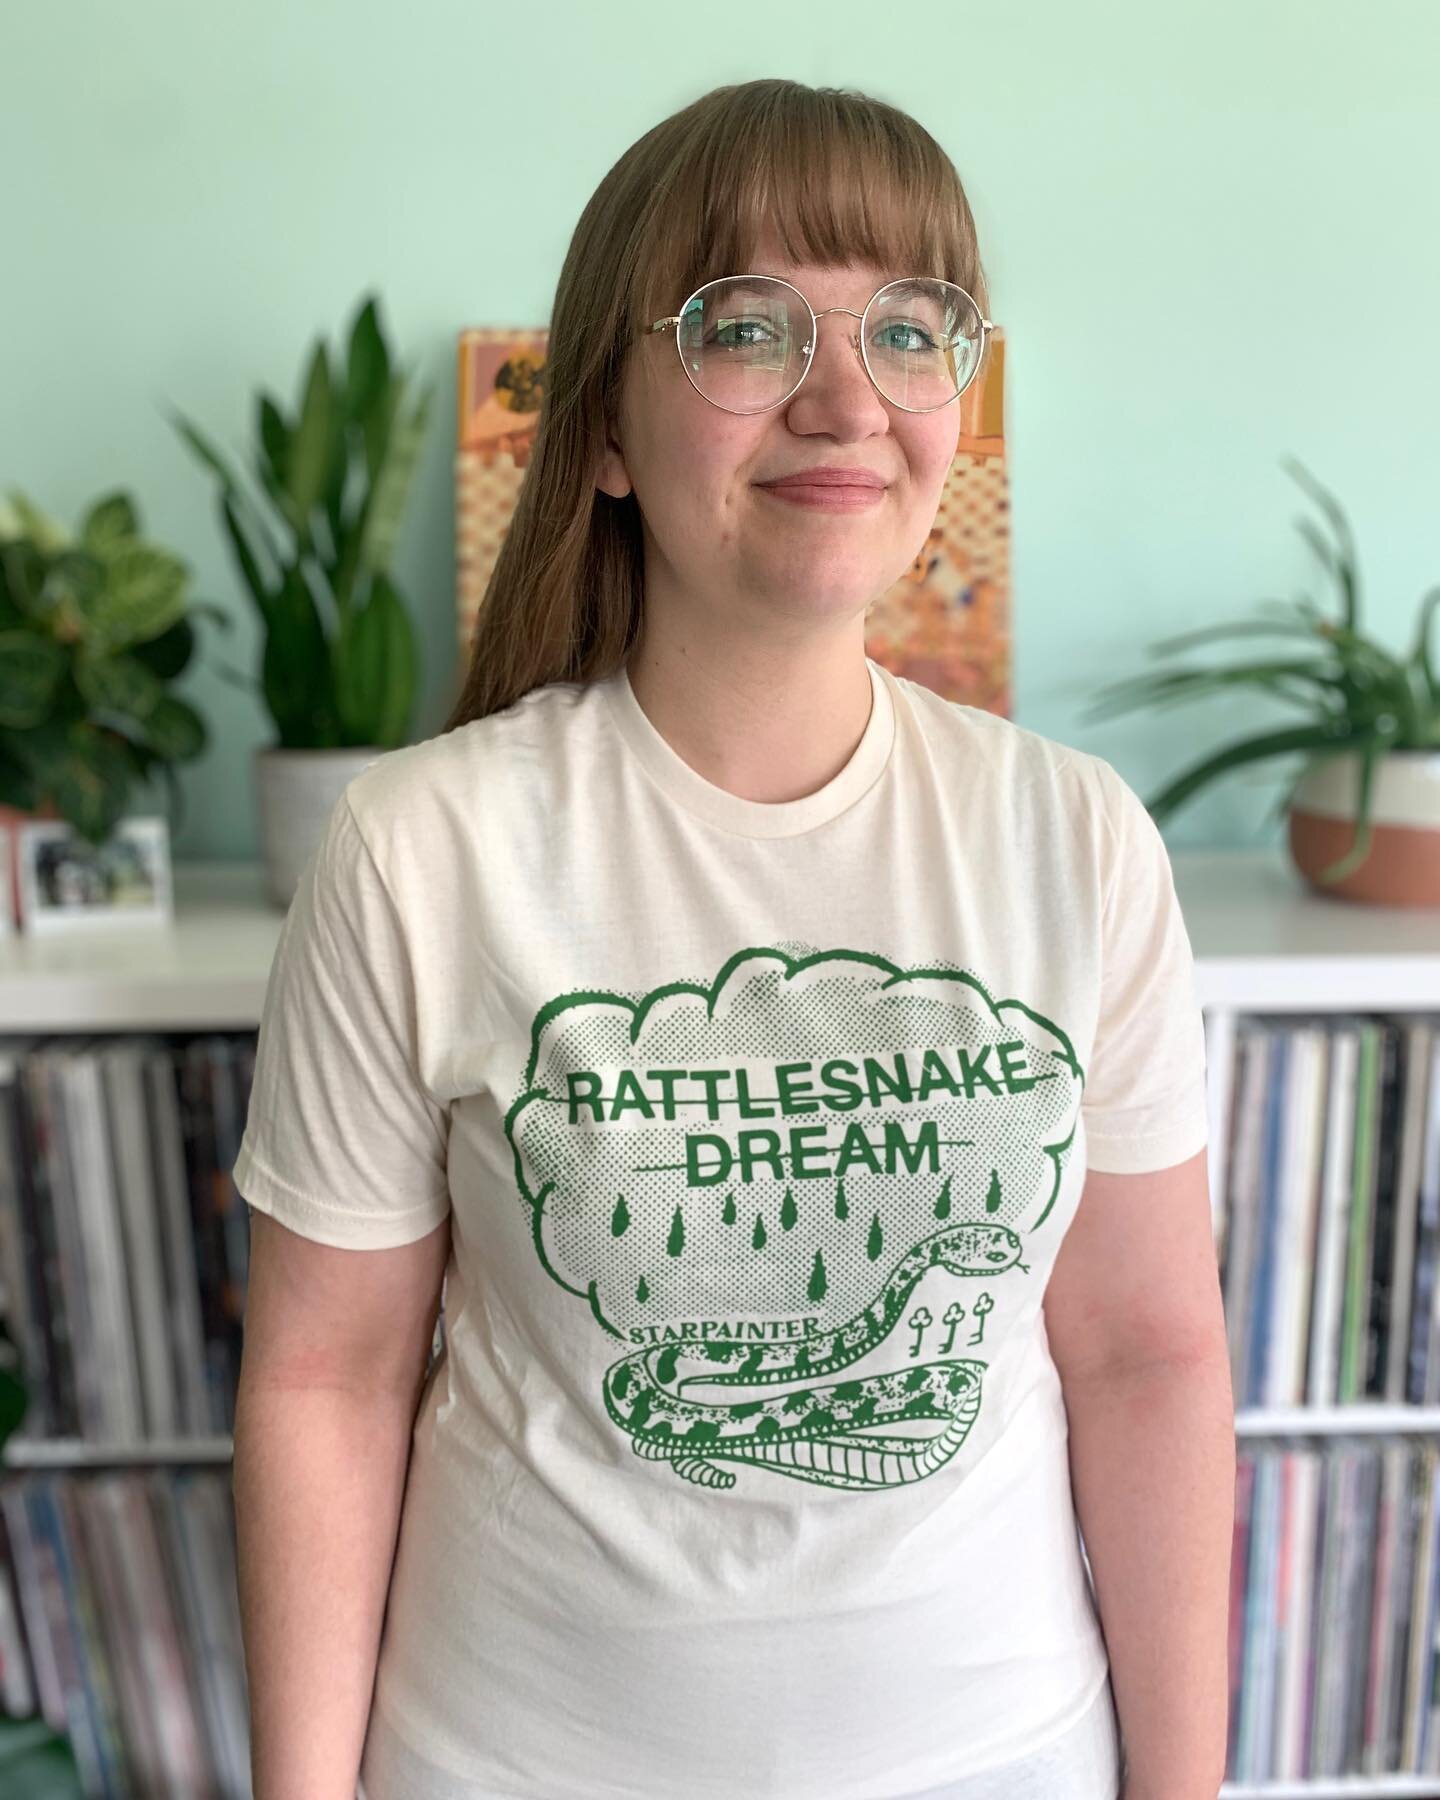 It&rsquo;s an honour to share these new Rattlesnake Dream t-shirts, designed by the one and only @t_salty! We&rsquo;ve been fans of Travis&rsquo;s work for a long time and love this Rattlesnake Dream design a whole lot. These were printed by the best